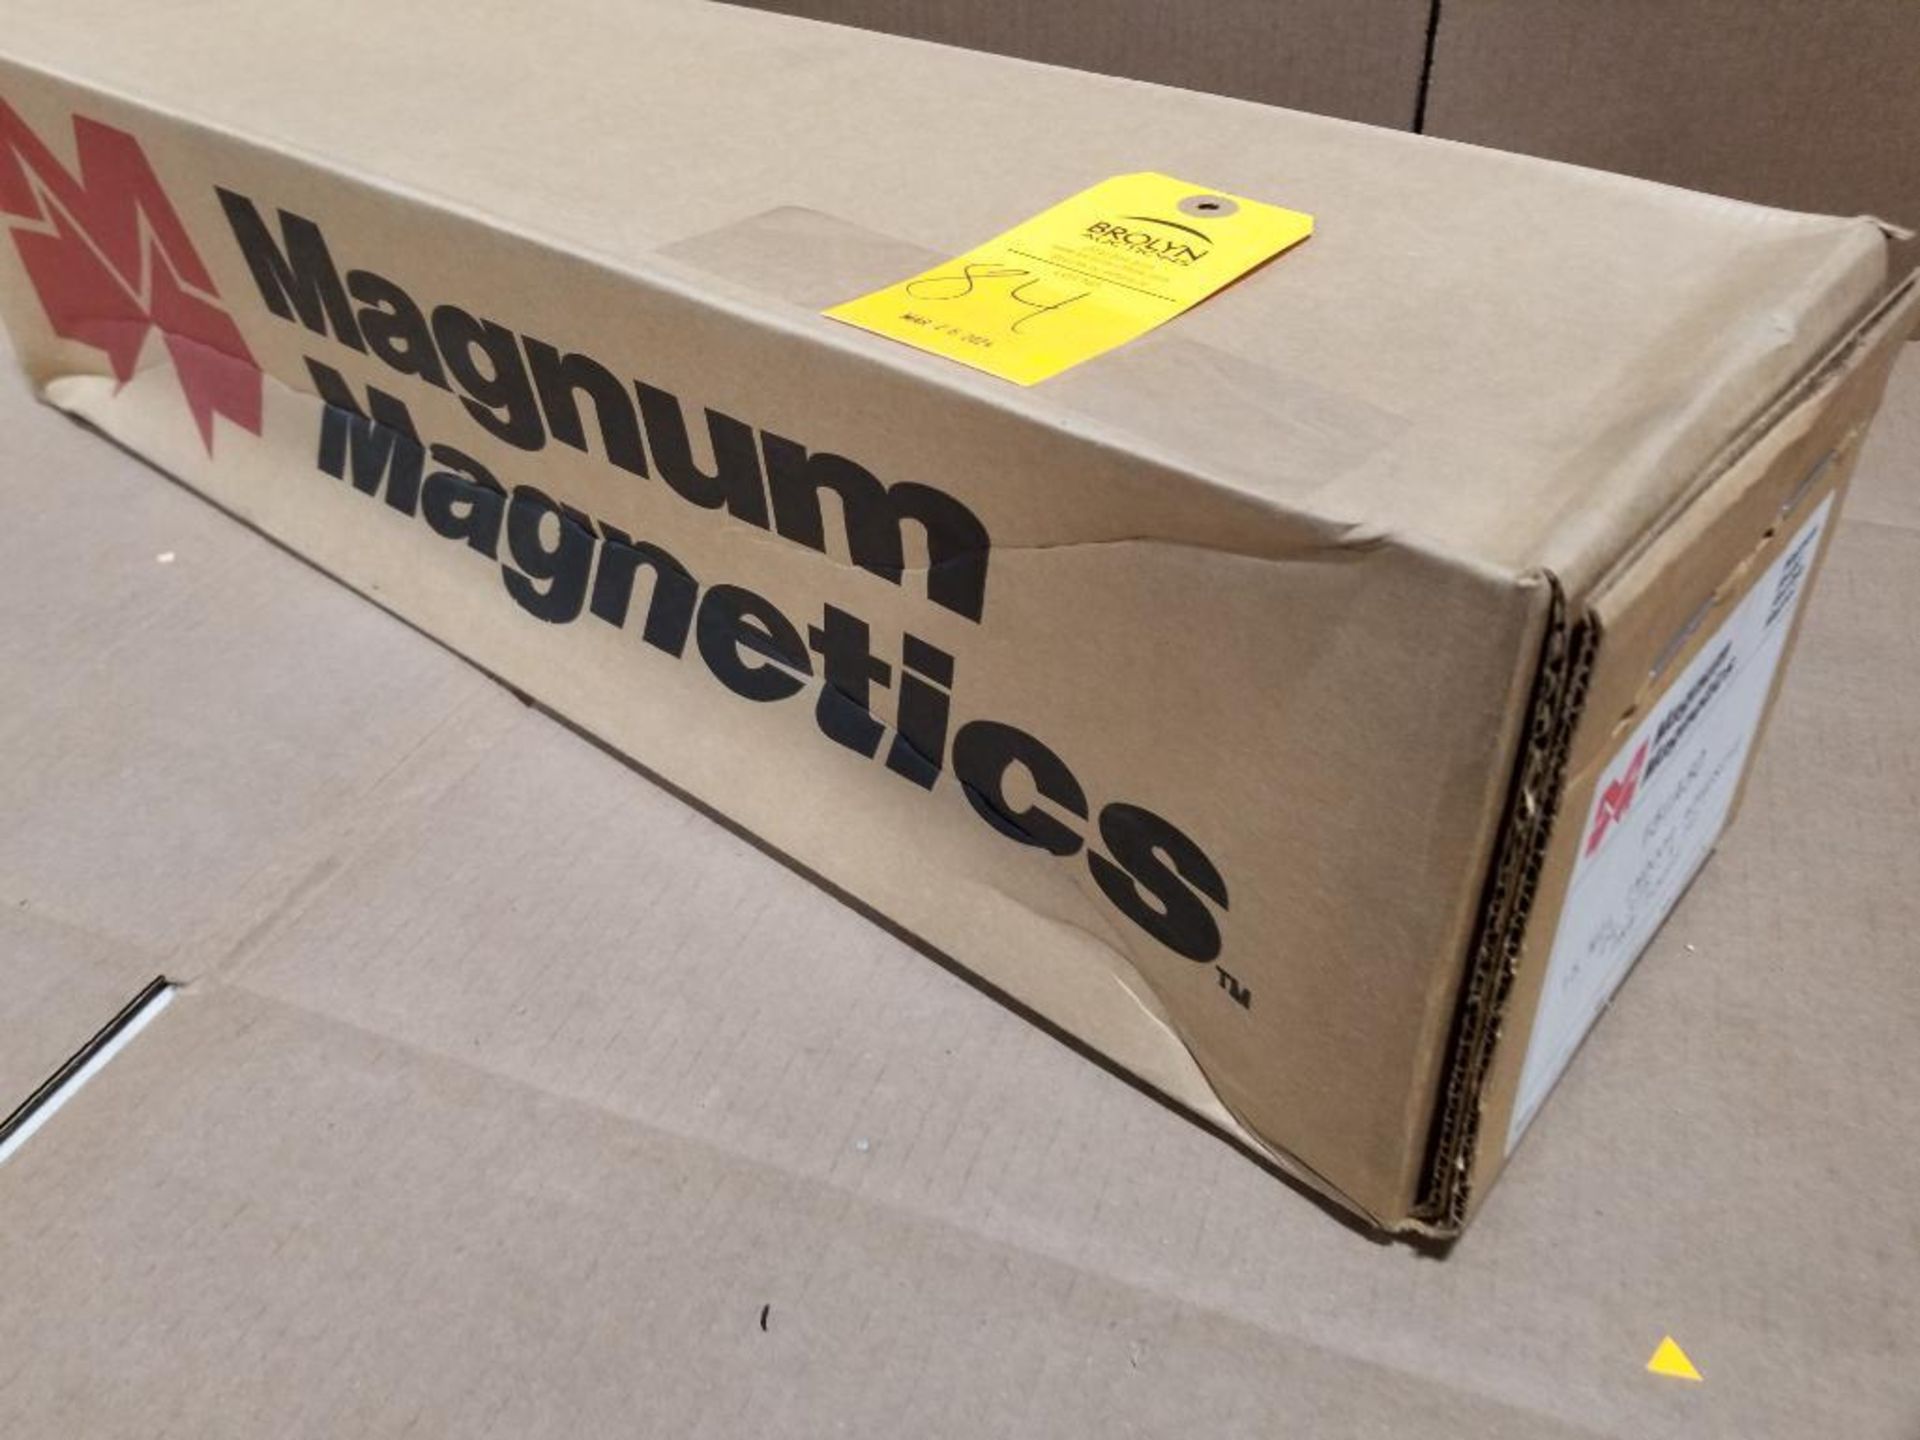 50ft - Magnum Magnetics sheeting roll. 15mil indoor adhesive. 24.375in x 50ft. Part # 15IA50.